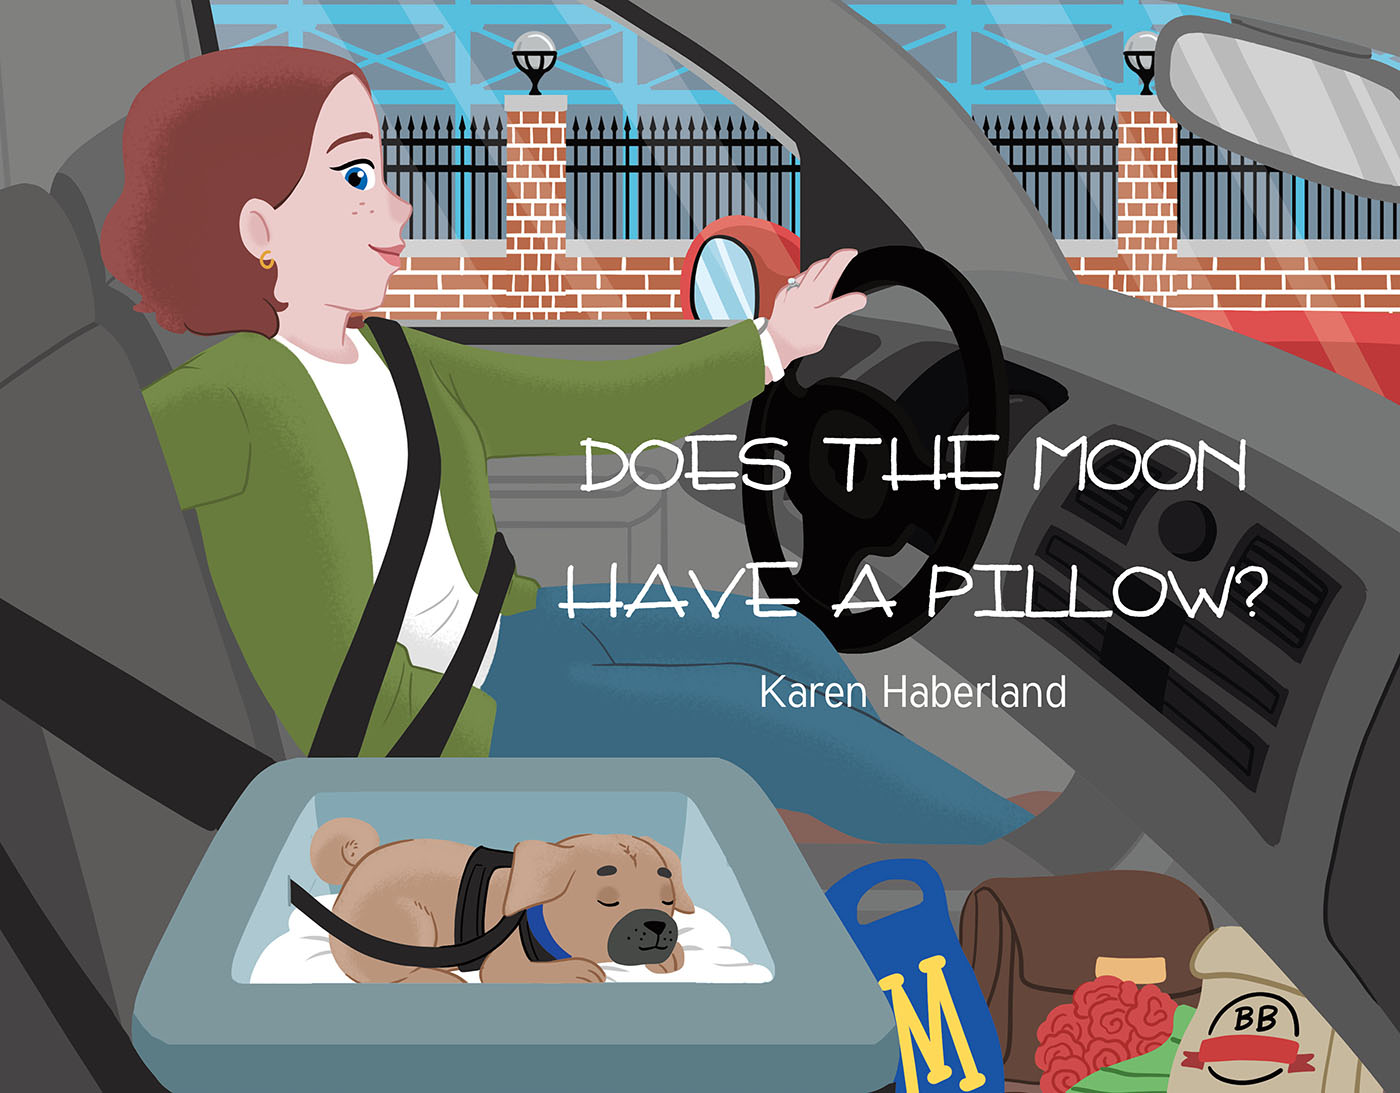 Author Karen Haberland’s New Book, "Does the Moon Have a Pillow?" Is a Heartwarming Story of a Hilarious Conversation Between a Mother and Her Son About the Moon